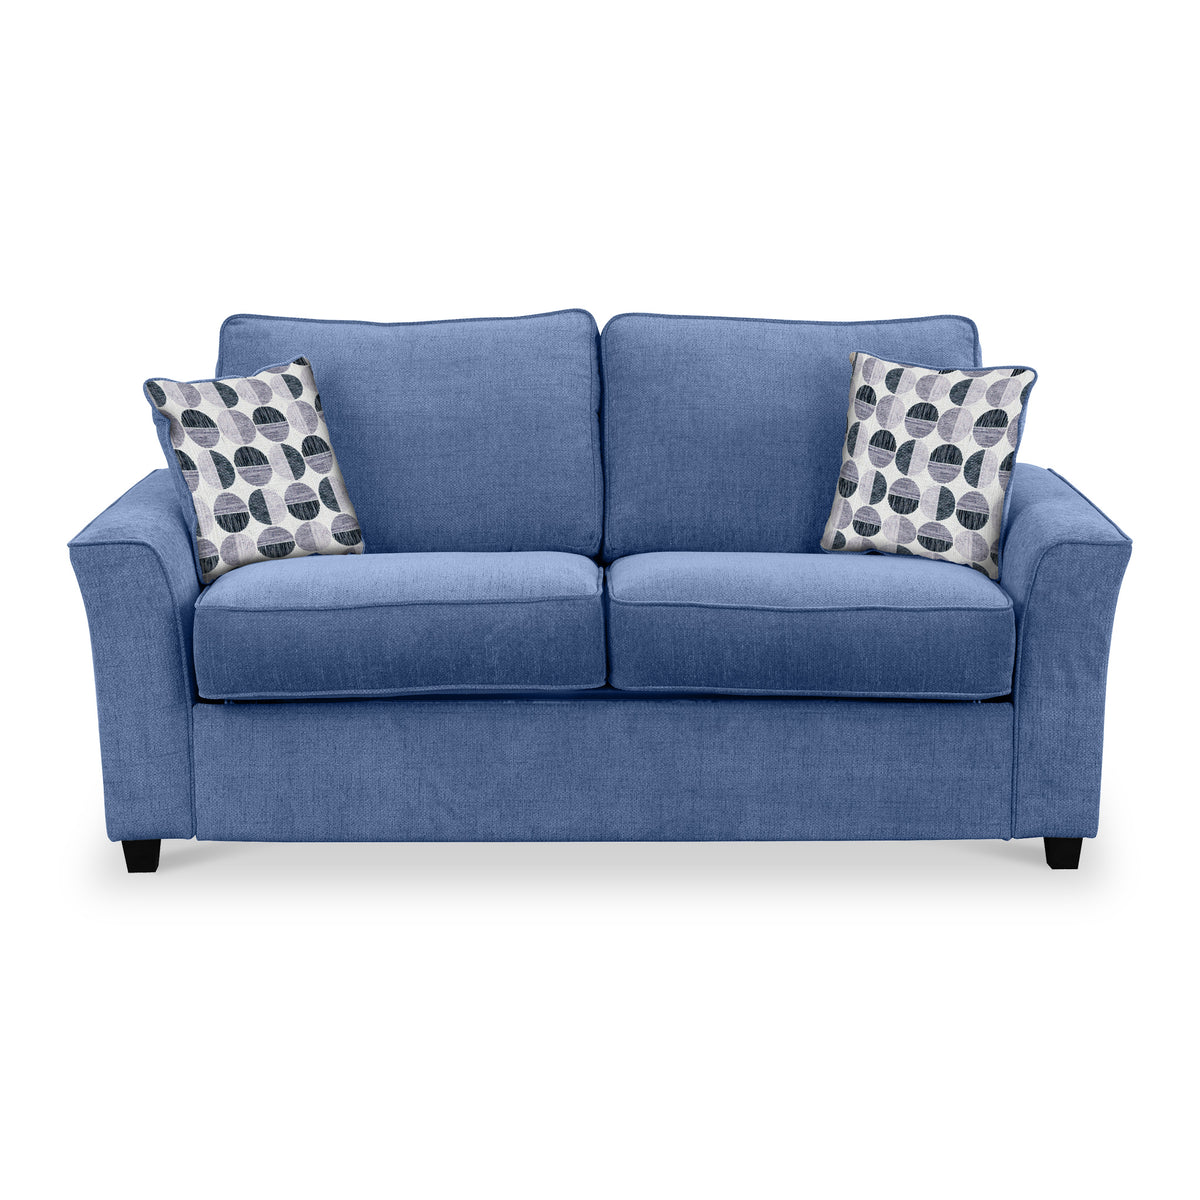 Abbott 2 Seater Sofabed in Denim with Rufus Mono Cushions by Roseland Furniture